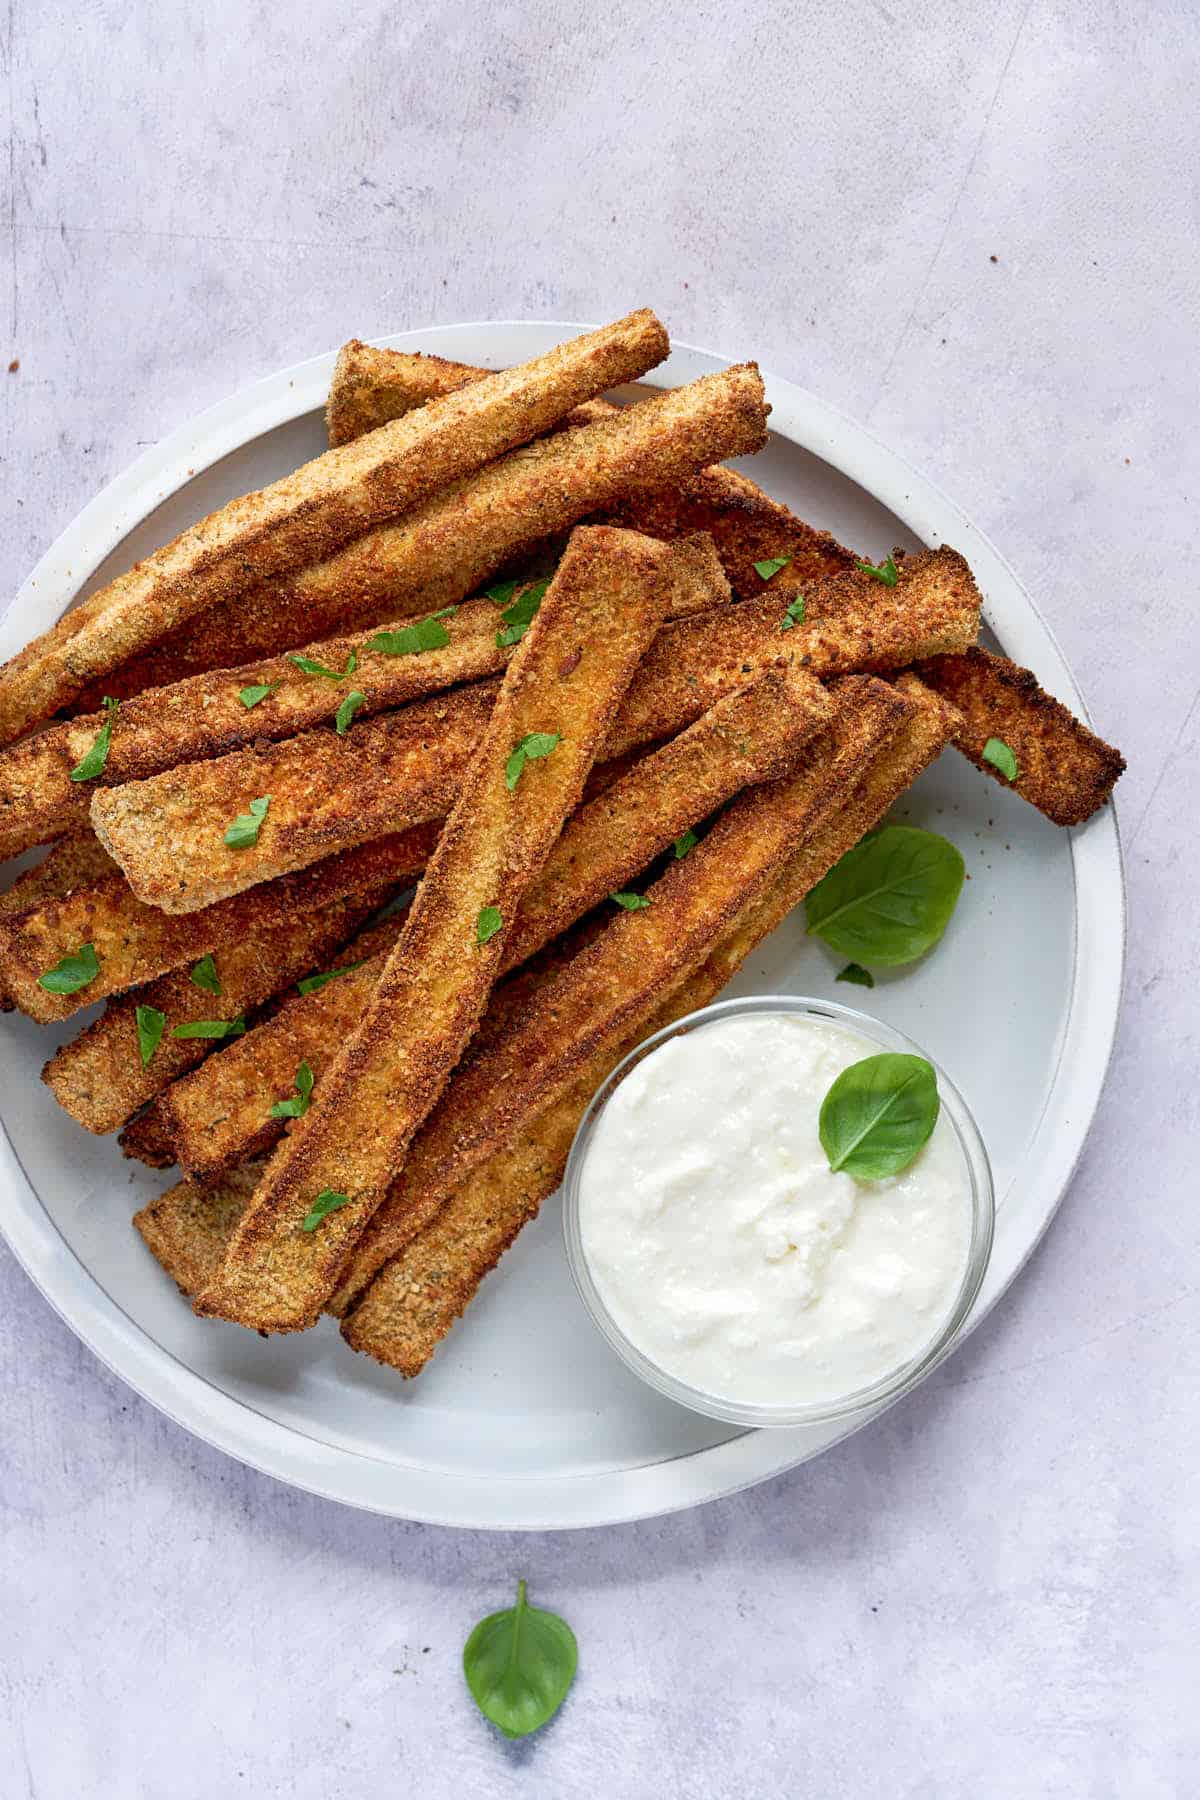 Eggplant fries served with dipping sauce and sprinkled with fresh herbs.